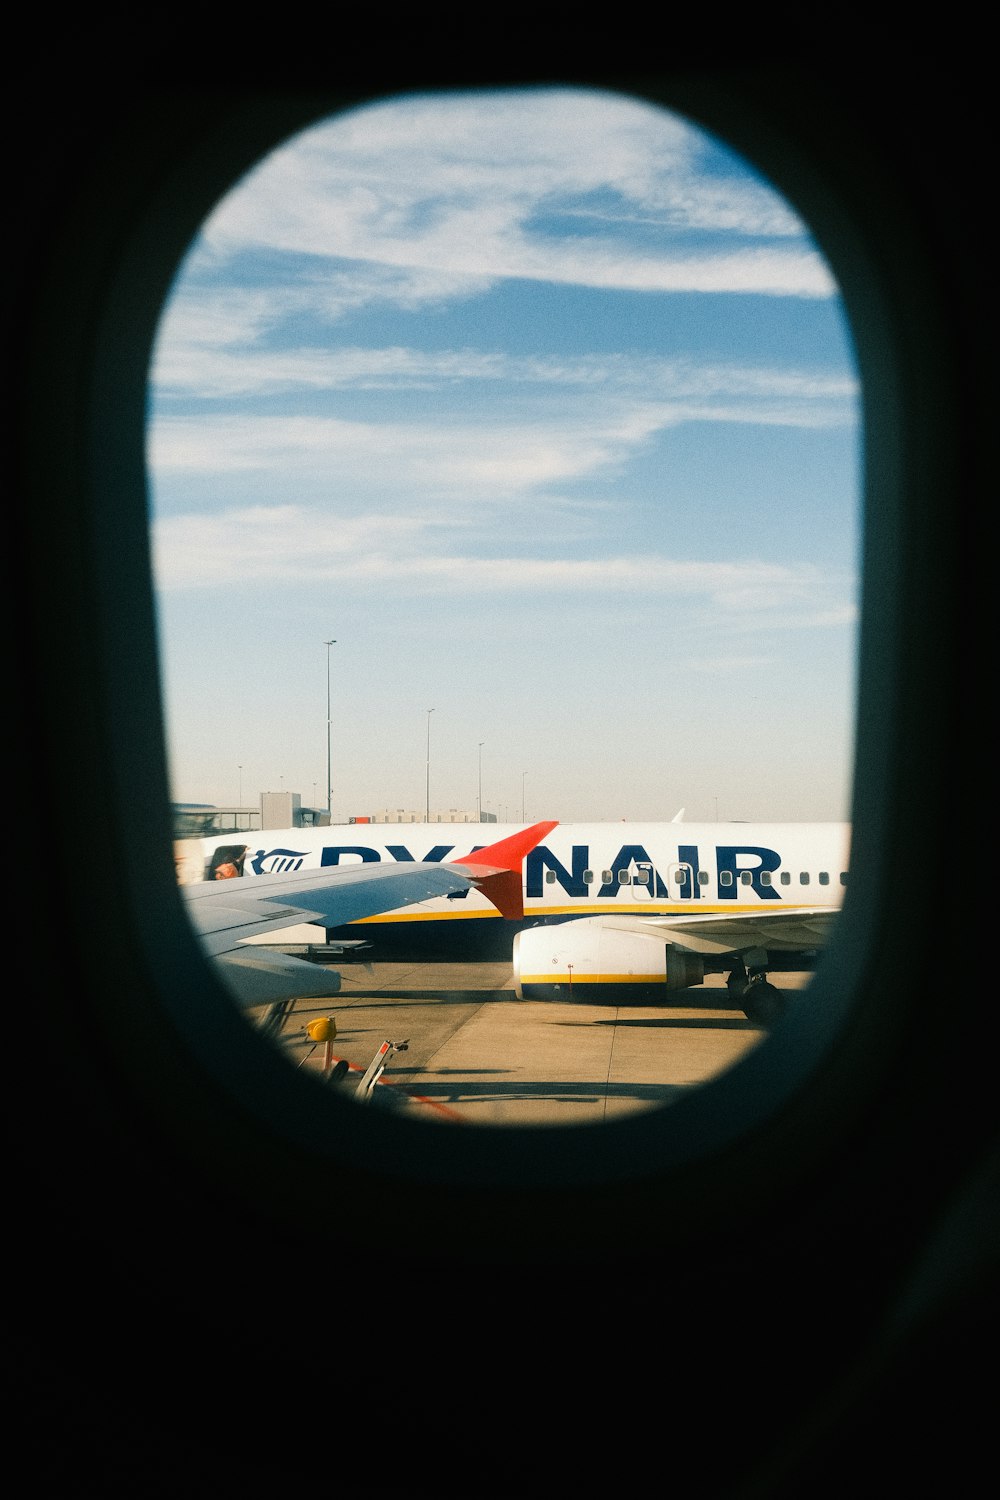 a view of an airplane from a window